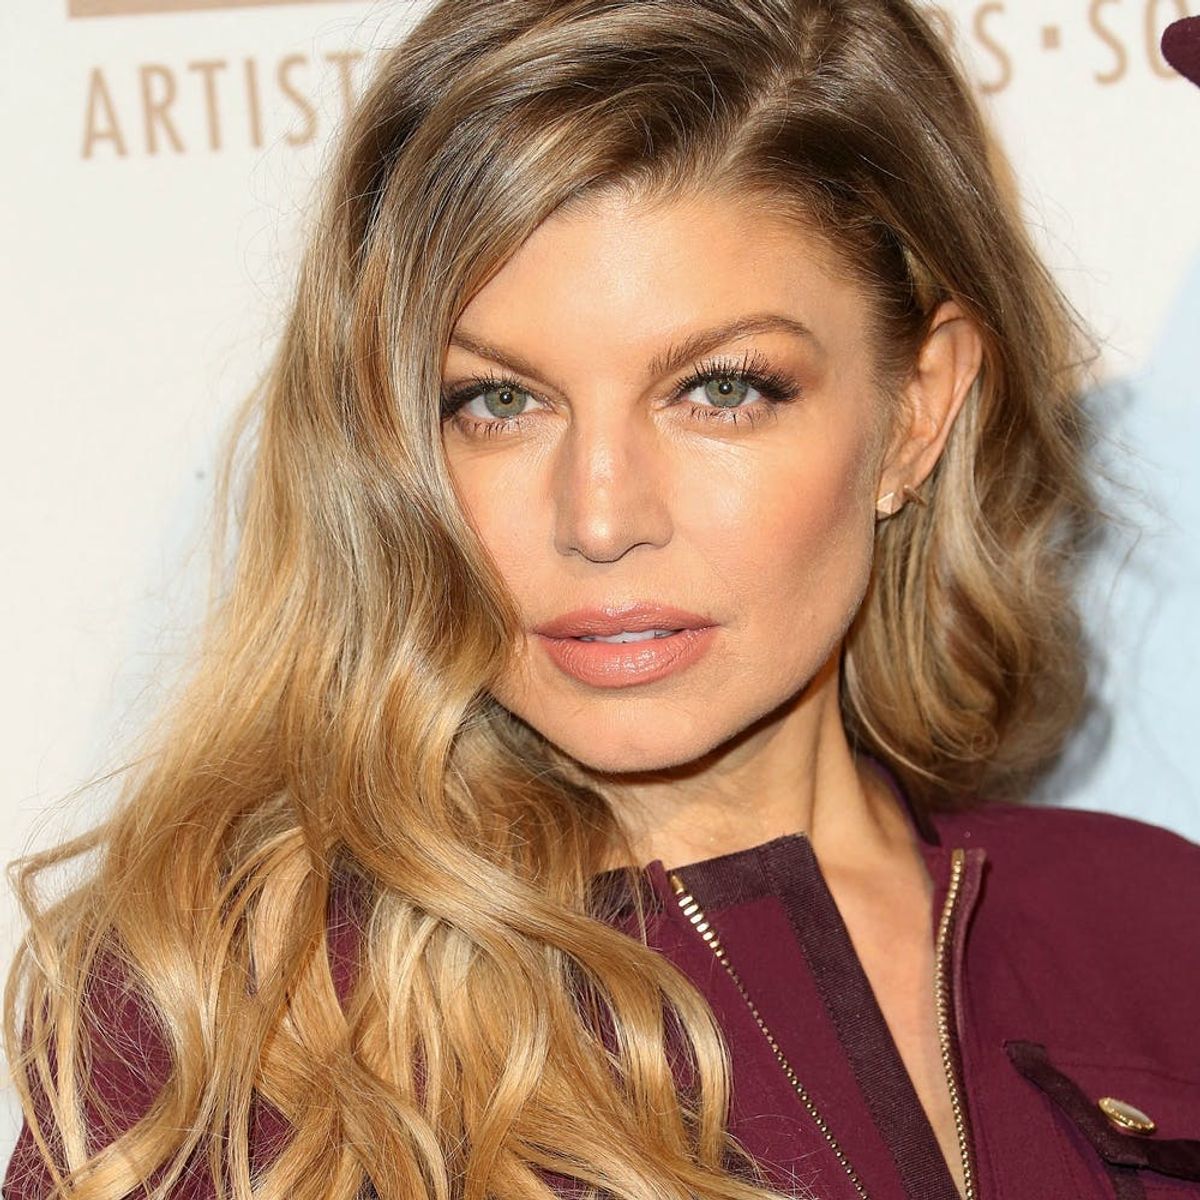 Watch Fergie Give Herself a Super Chic Summer Haircut